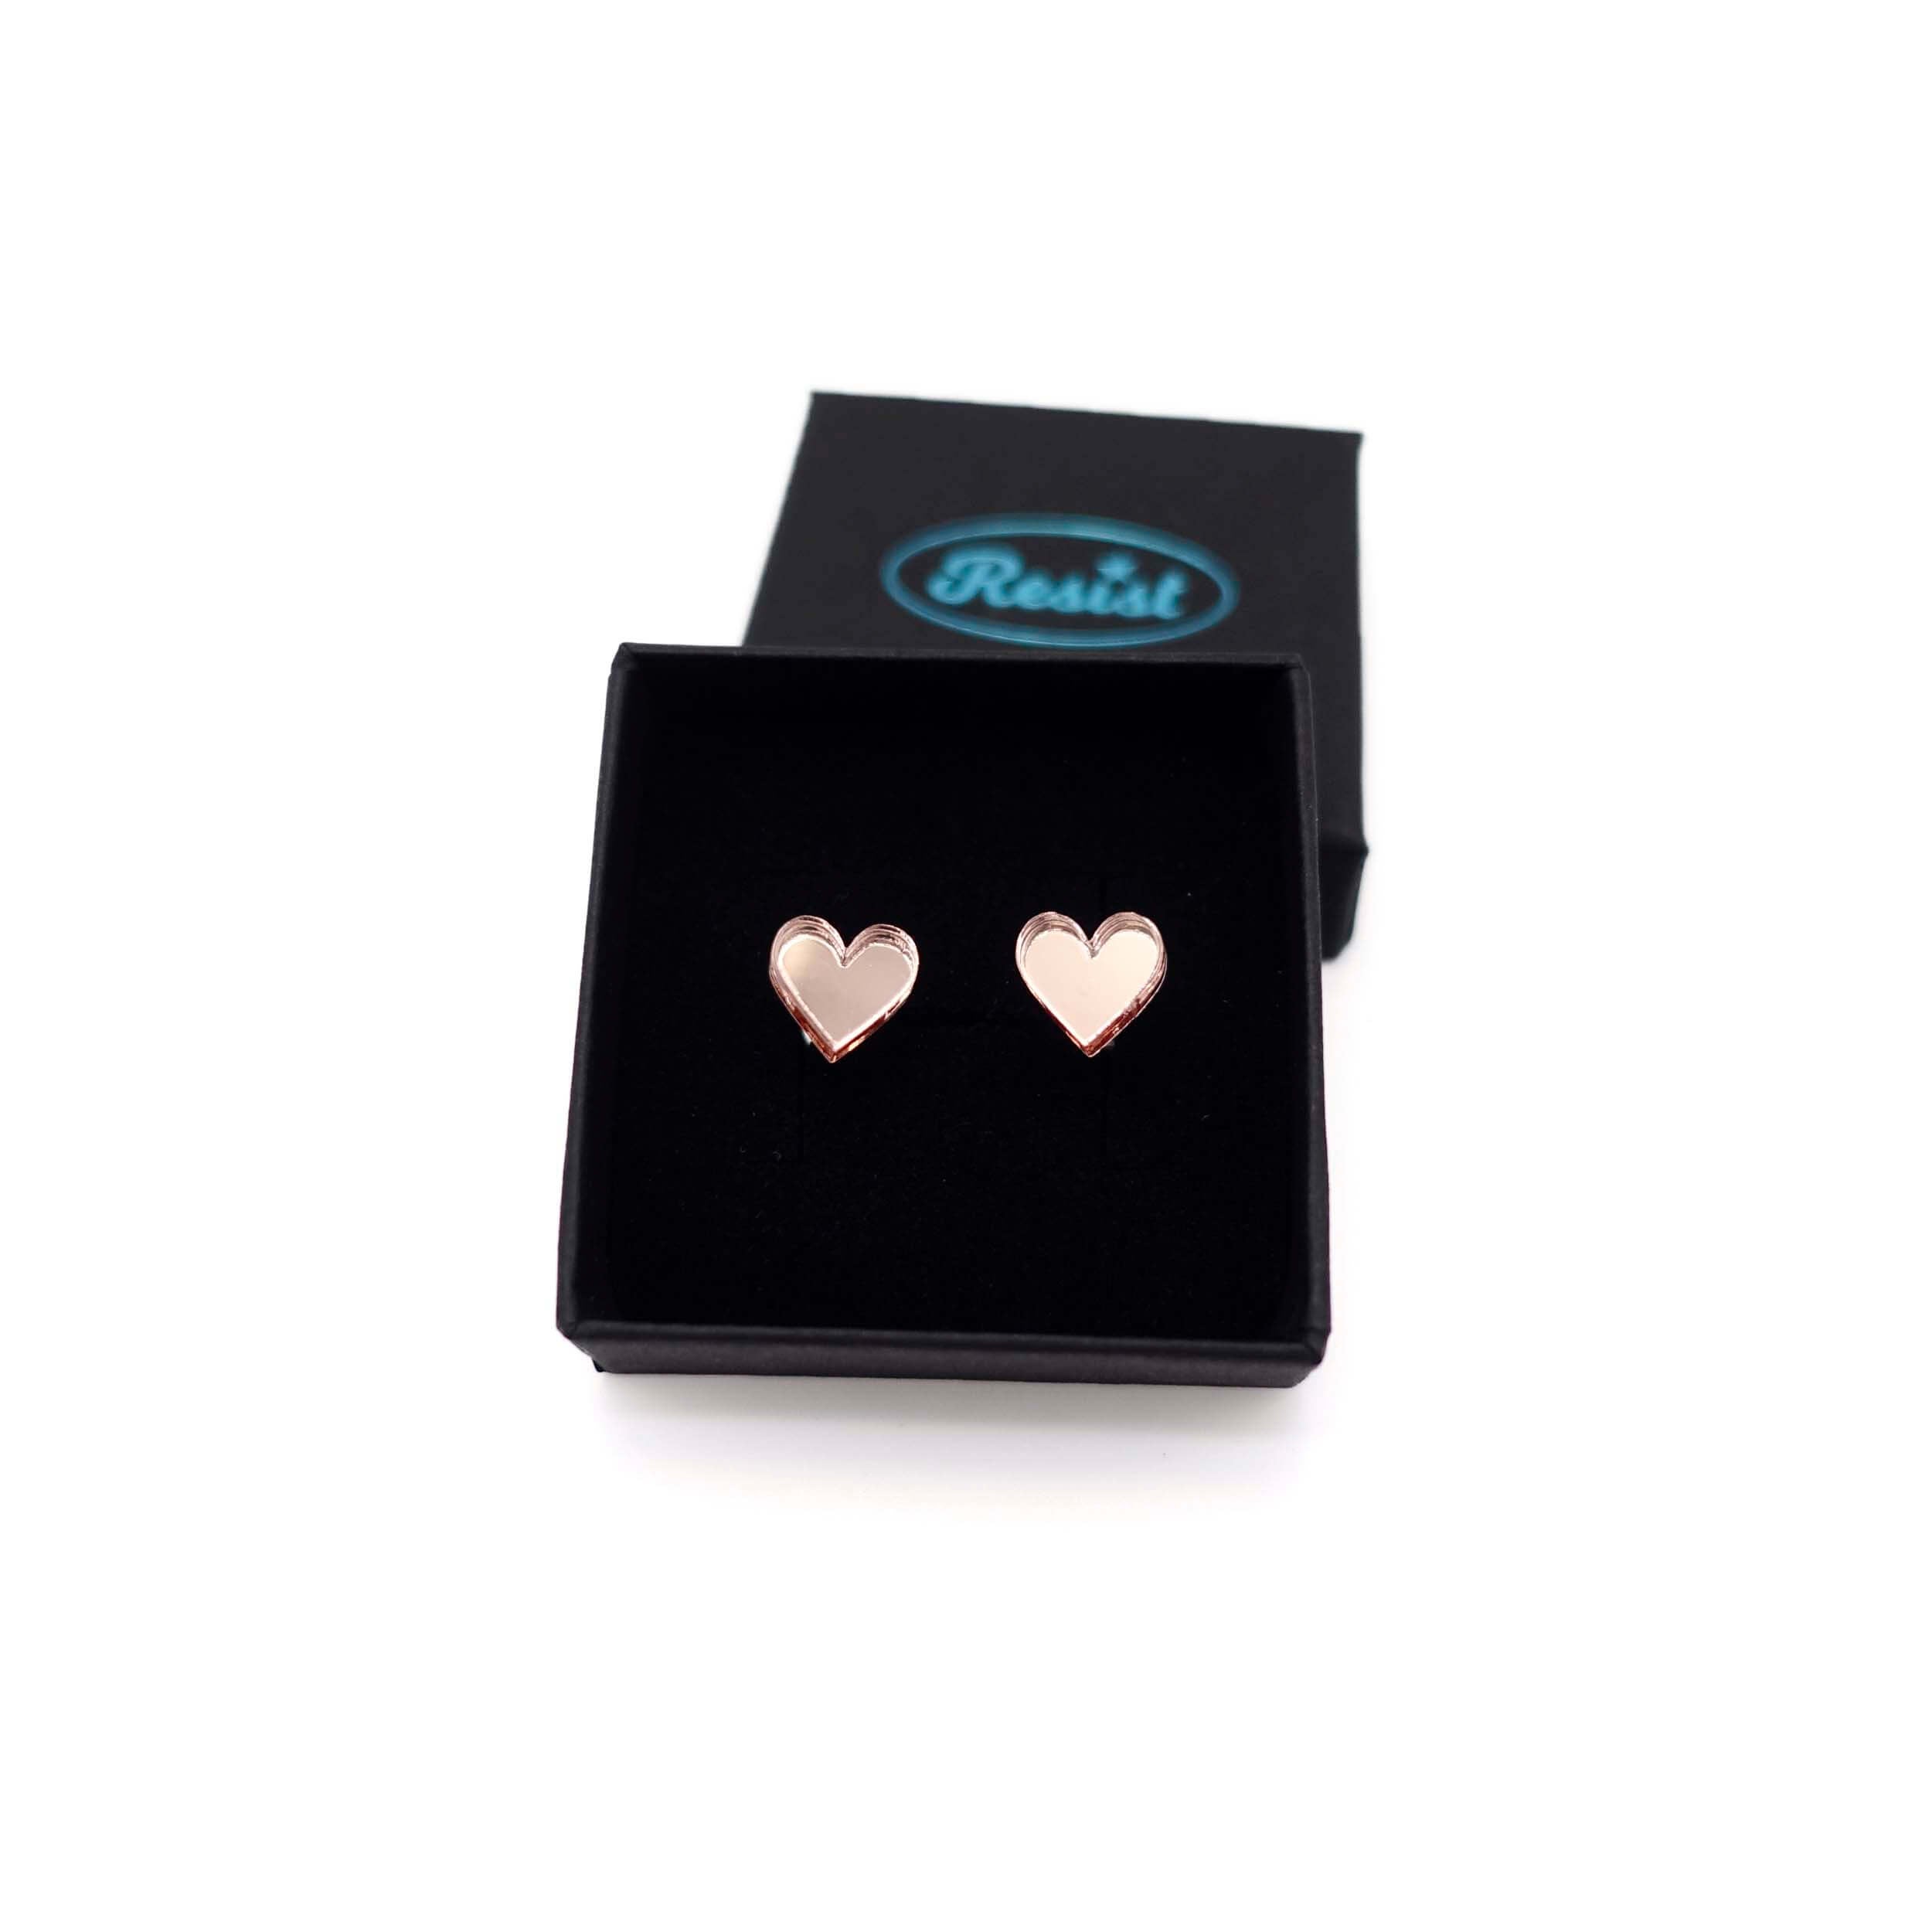 Rose gold mirror tiny heart stud earrings shown in a Wear and Resist gift box. 